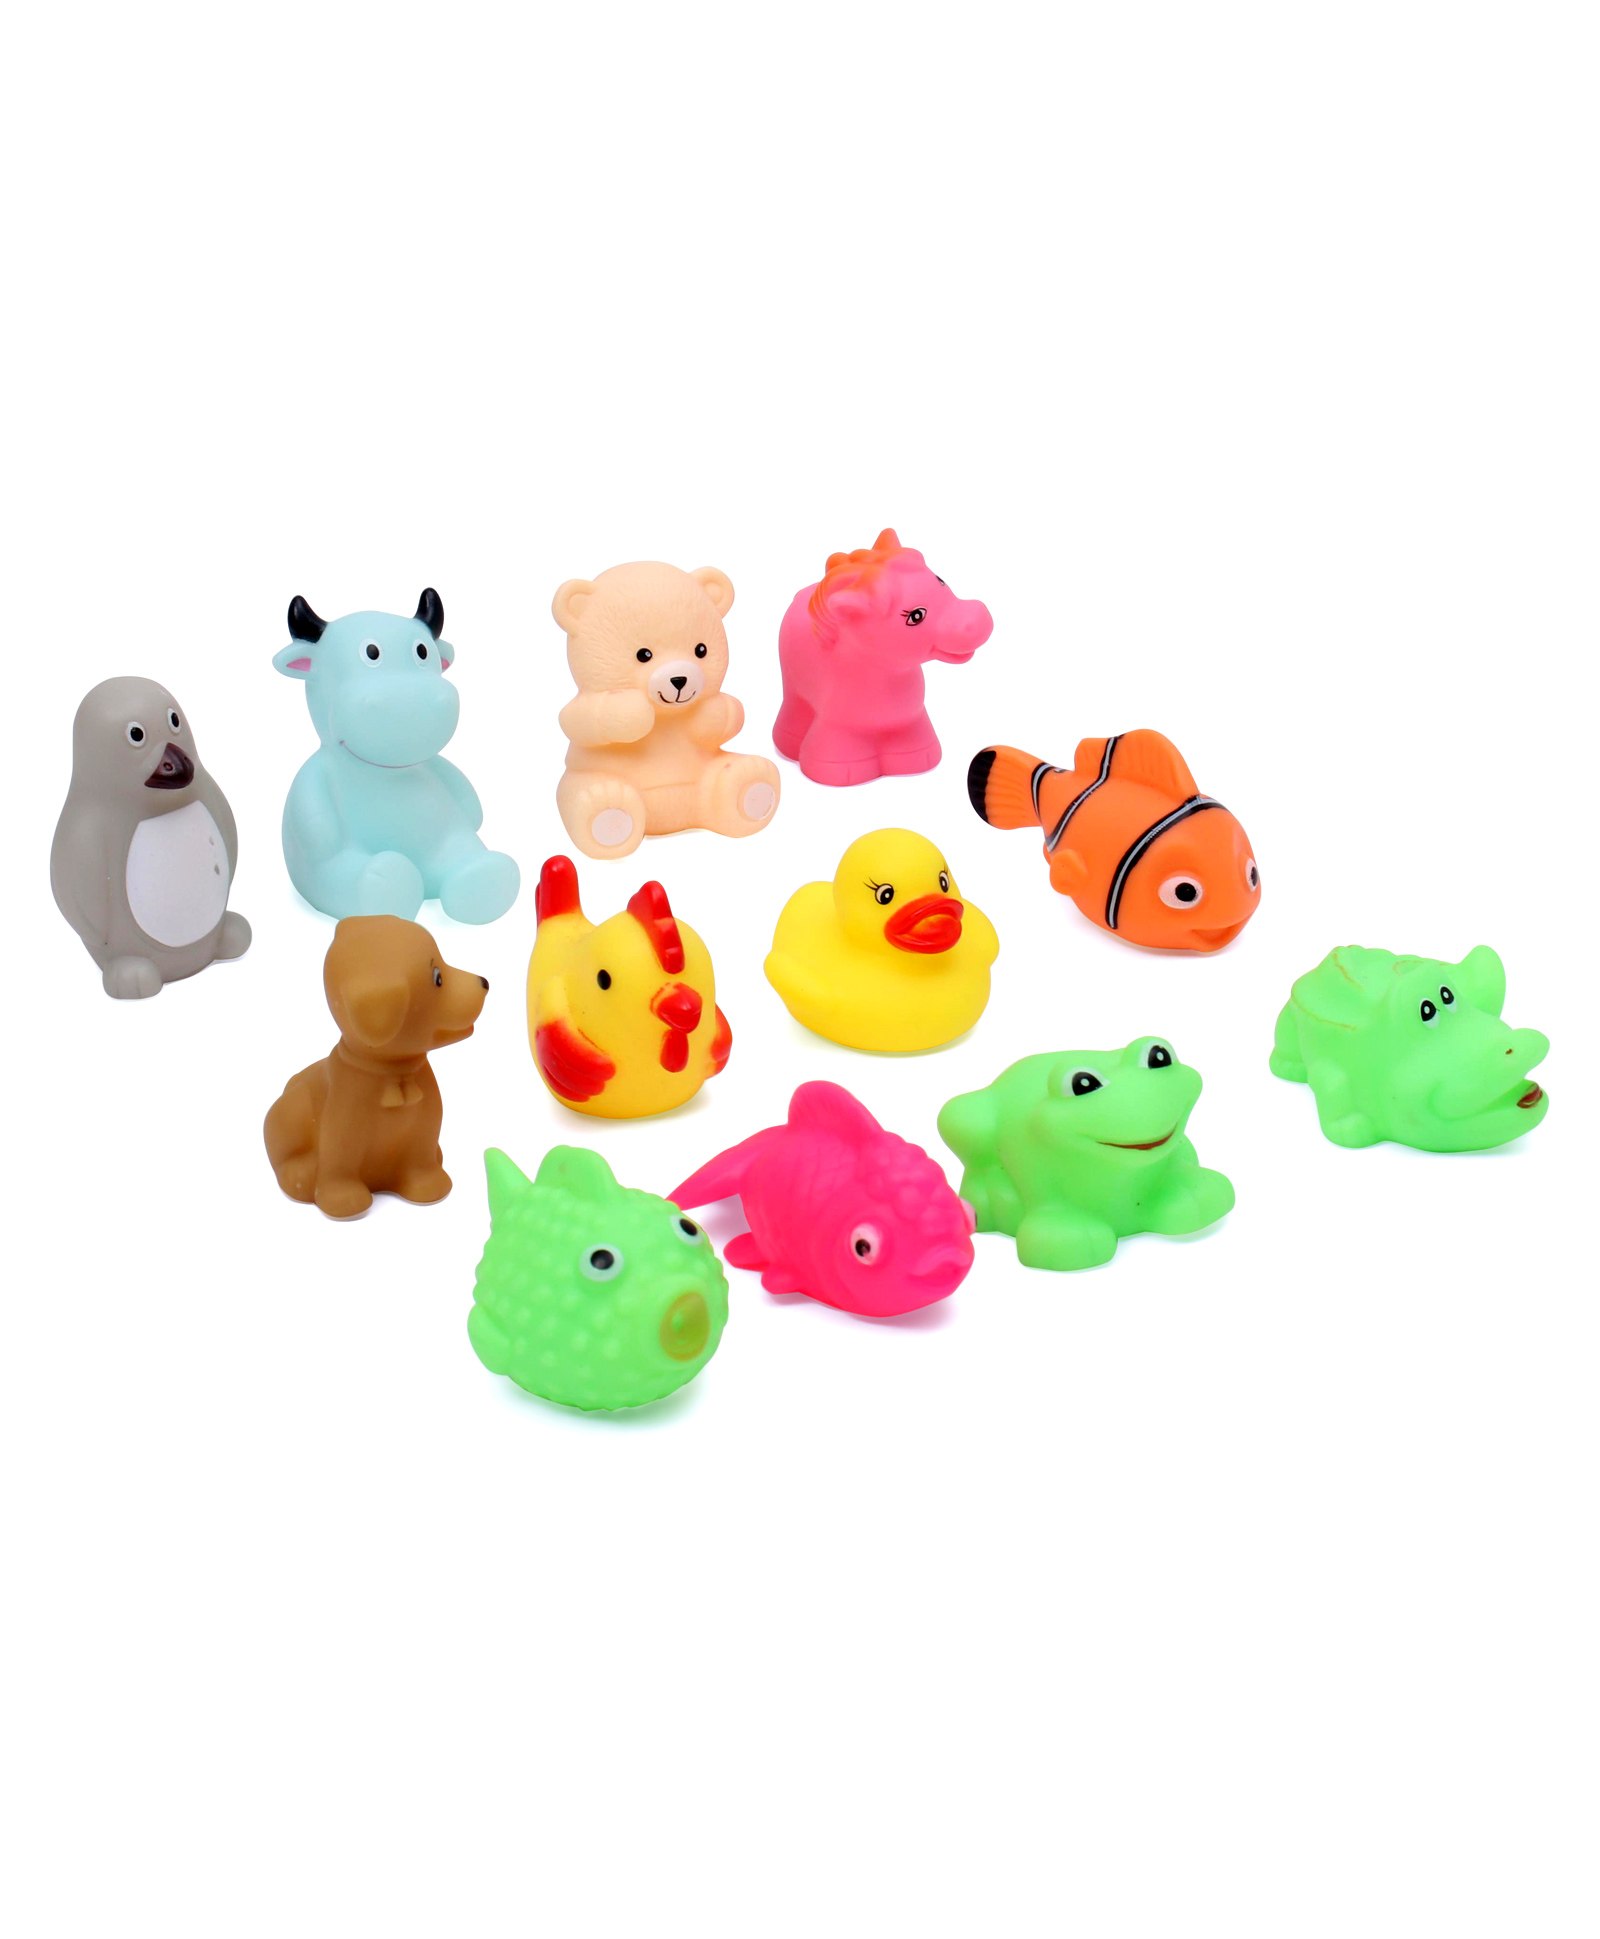 Rising Step Chu Chu Animal Theme Bath Toys Small Size Multicolor - 12  Pieces Online India, Buy Bath Toys for (0-24 Months) at  -  12035363